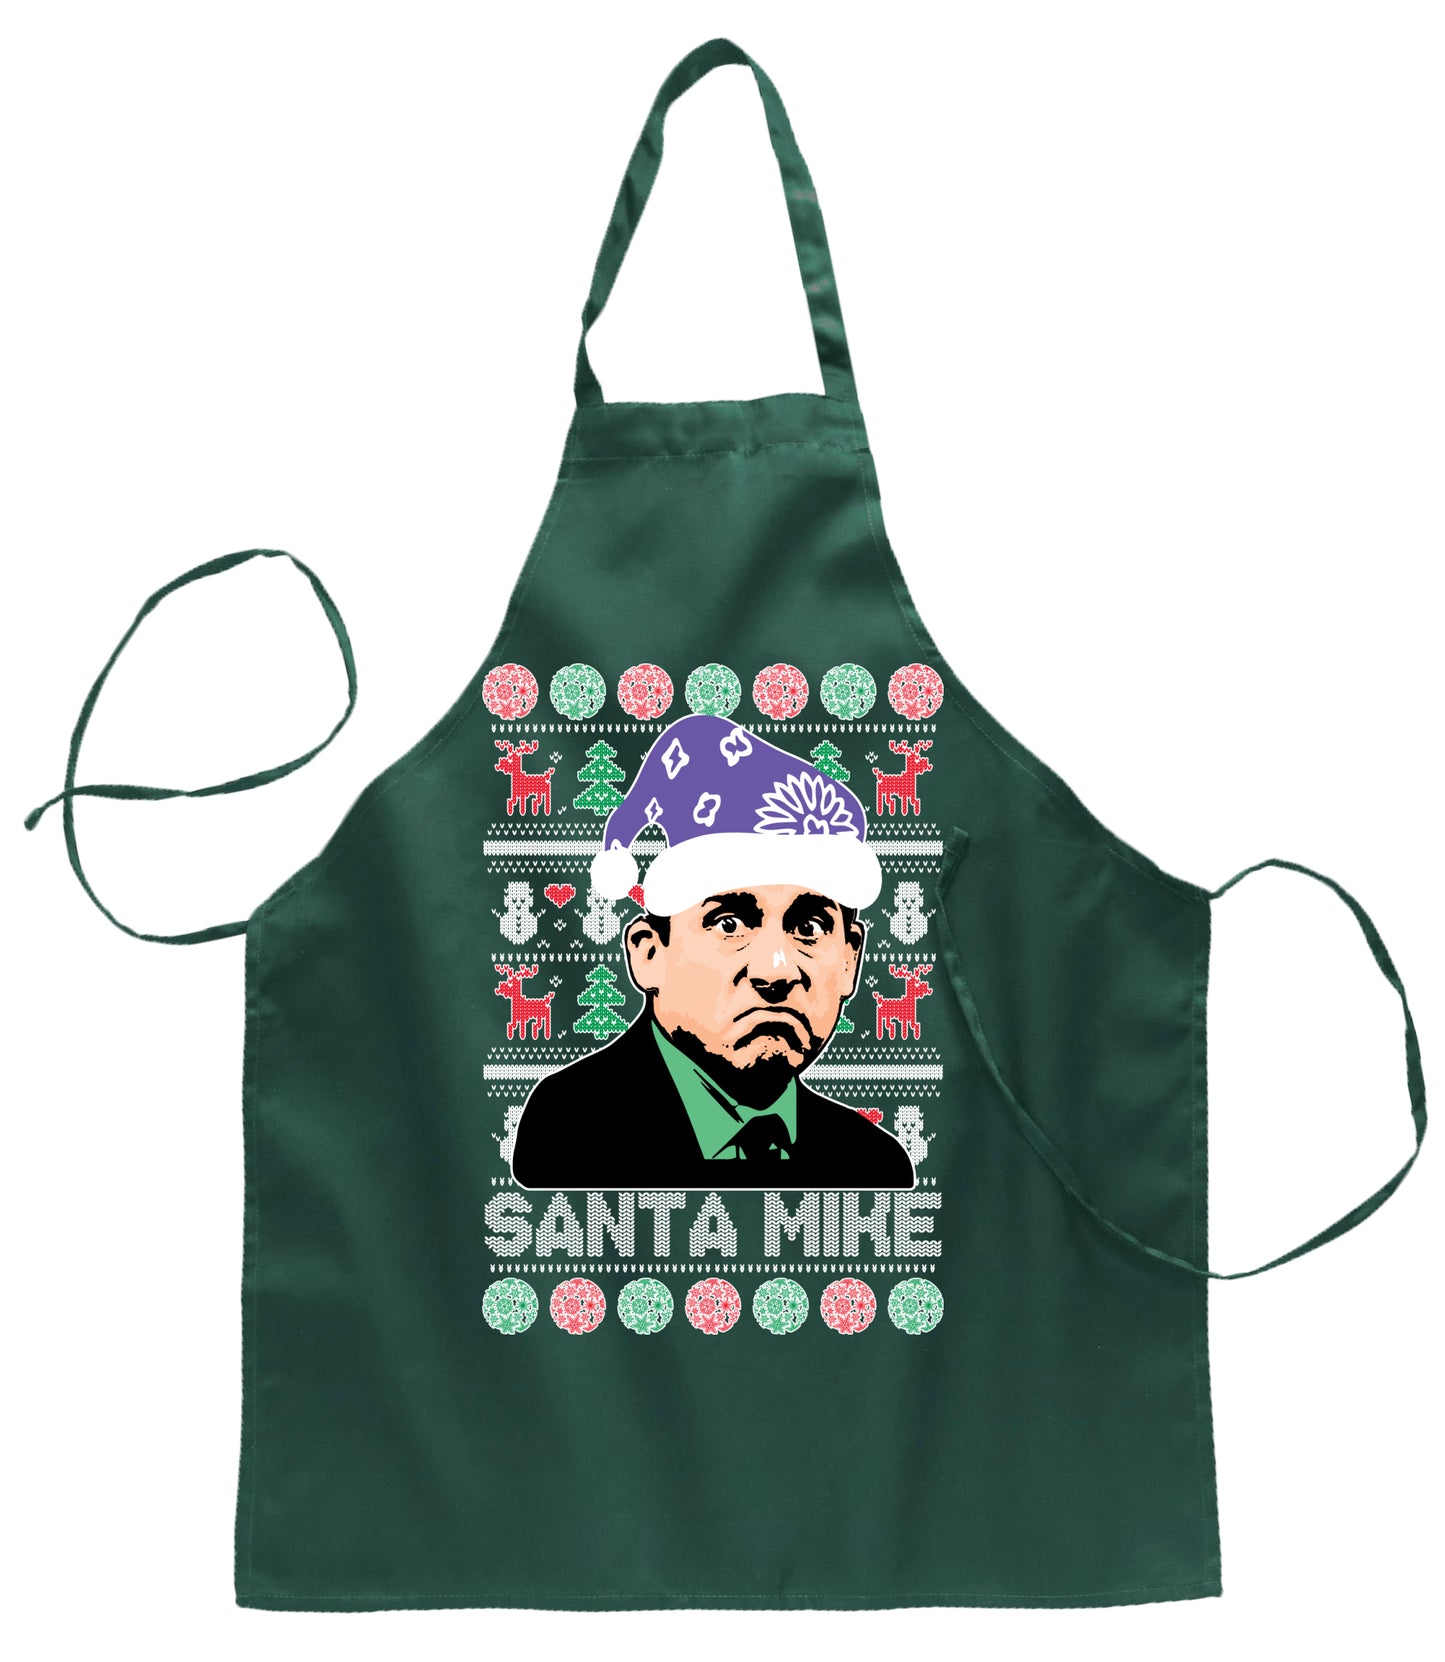 Santa Mike Michael Scott The Office Christmas Ugly Christmas Sweater Ugly Christmas Butcher Graphic Apron for Kitchen BBQ Grilling Cooking